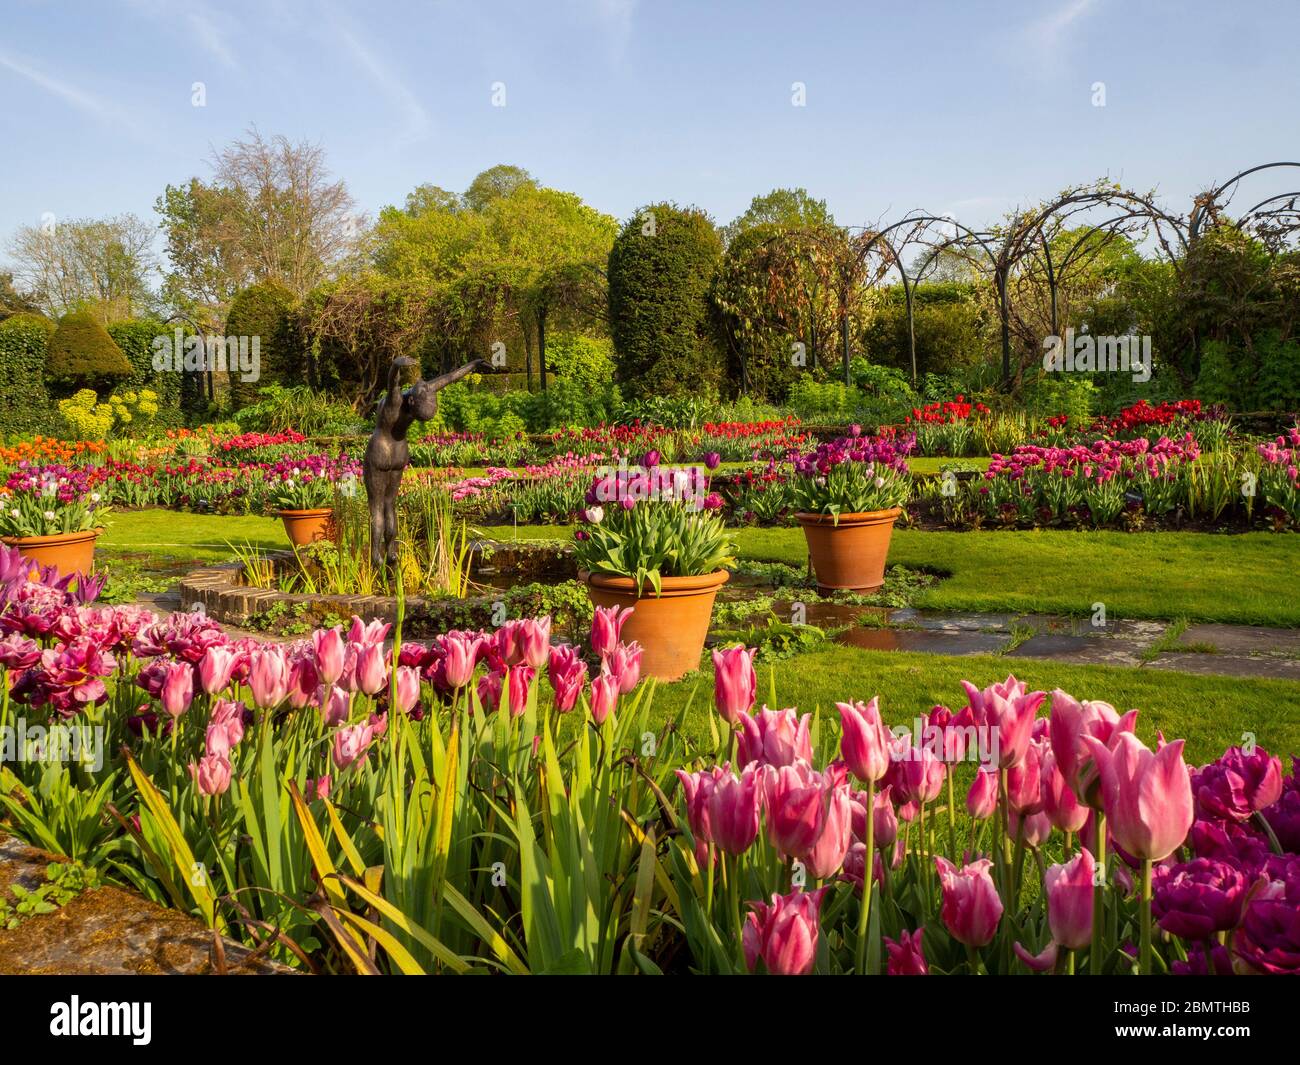 Sunken garden, Chenies Manor with ornamental pond, Alan Biggs sculpture of a diver, surrounded by tulips of various shades of pink and purple. Stock Photo